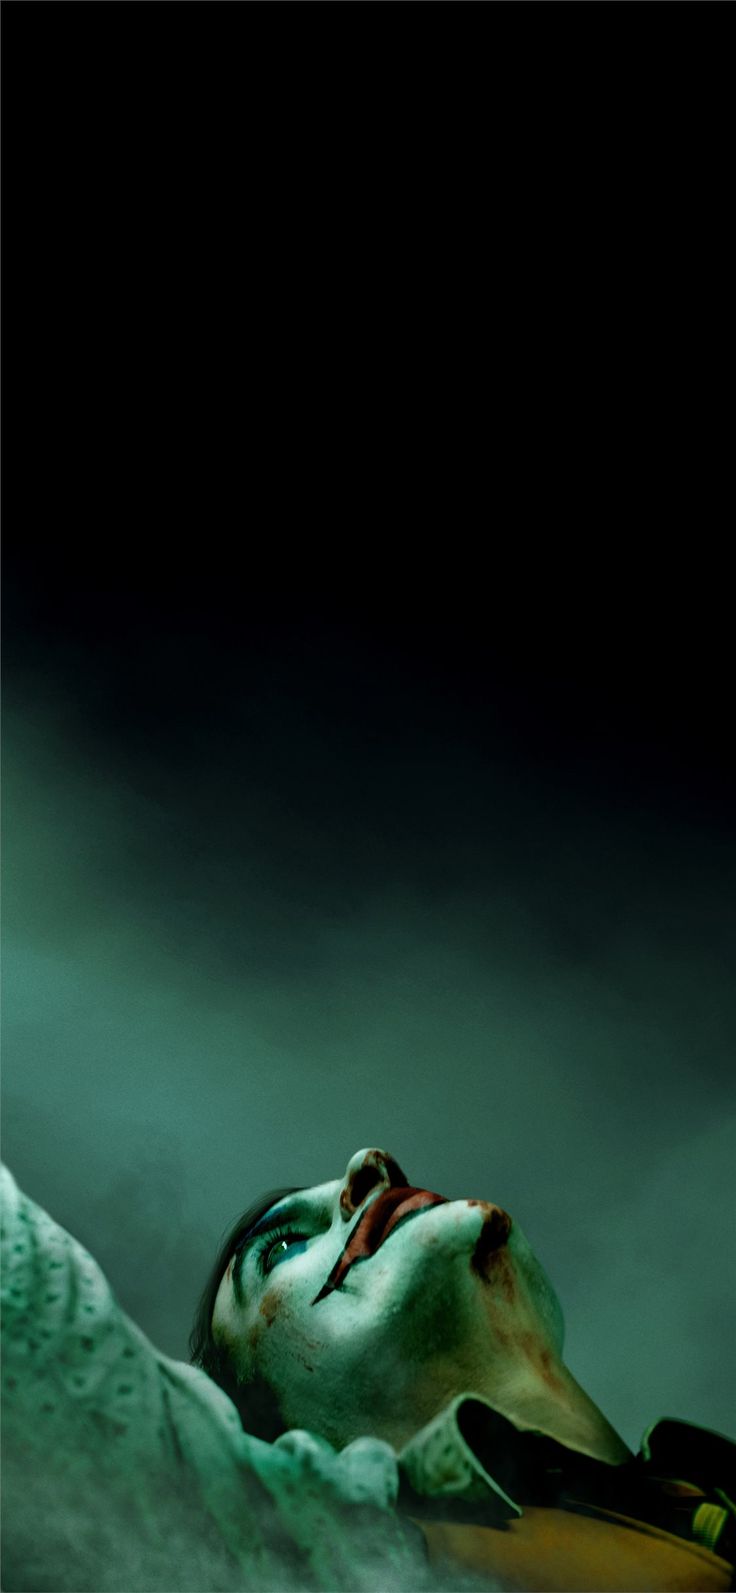 Movie Iphone Wallpapers